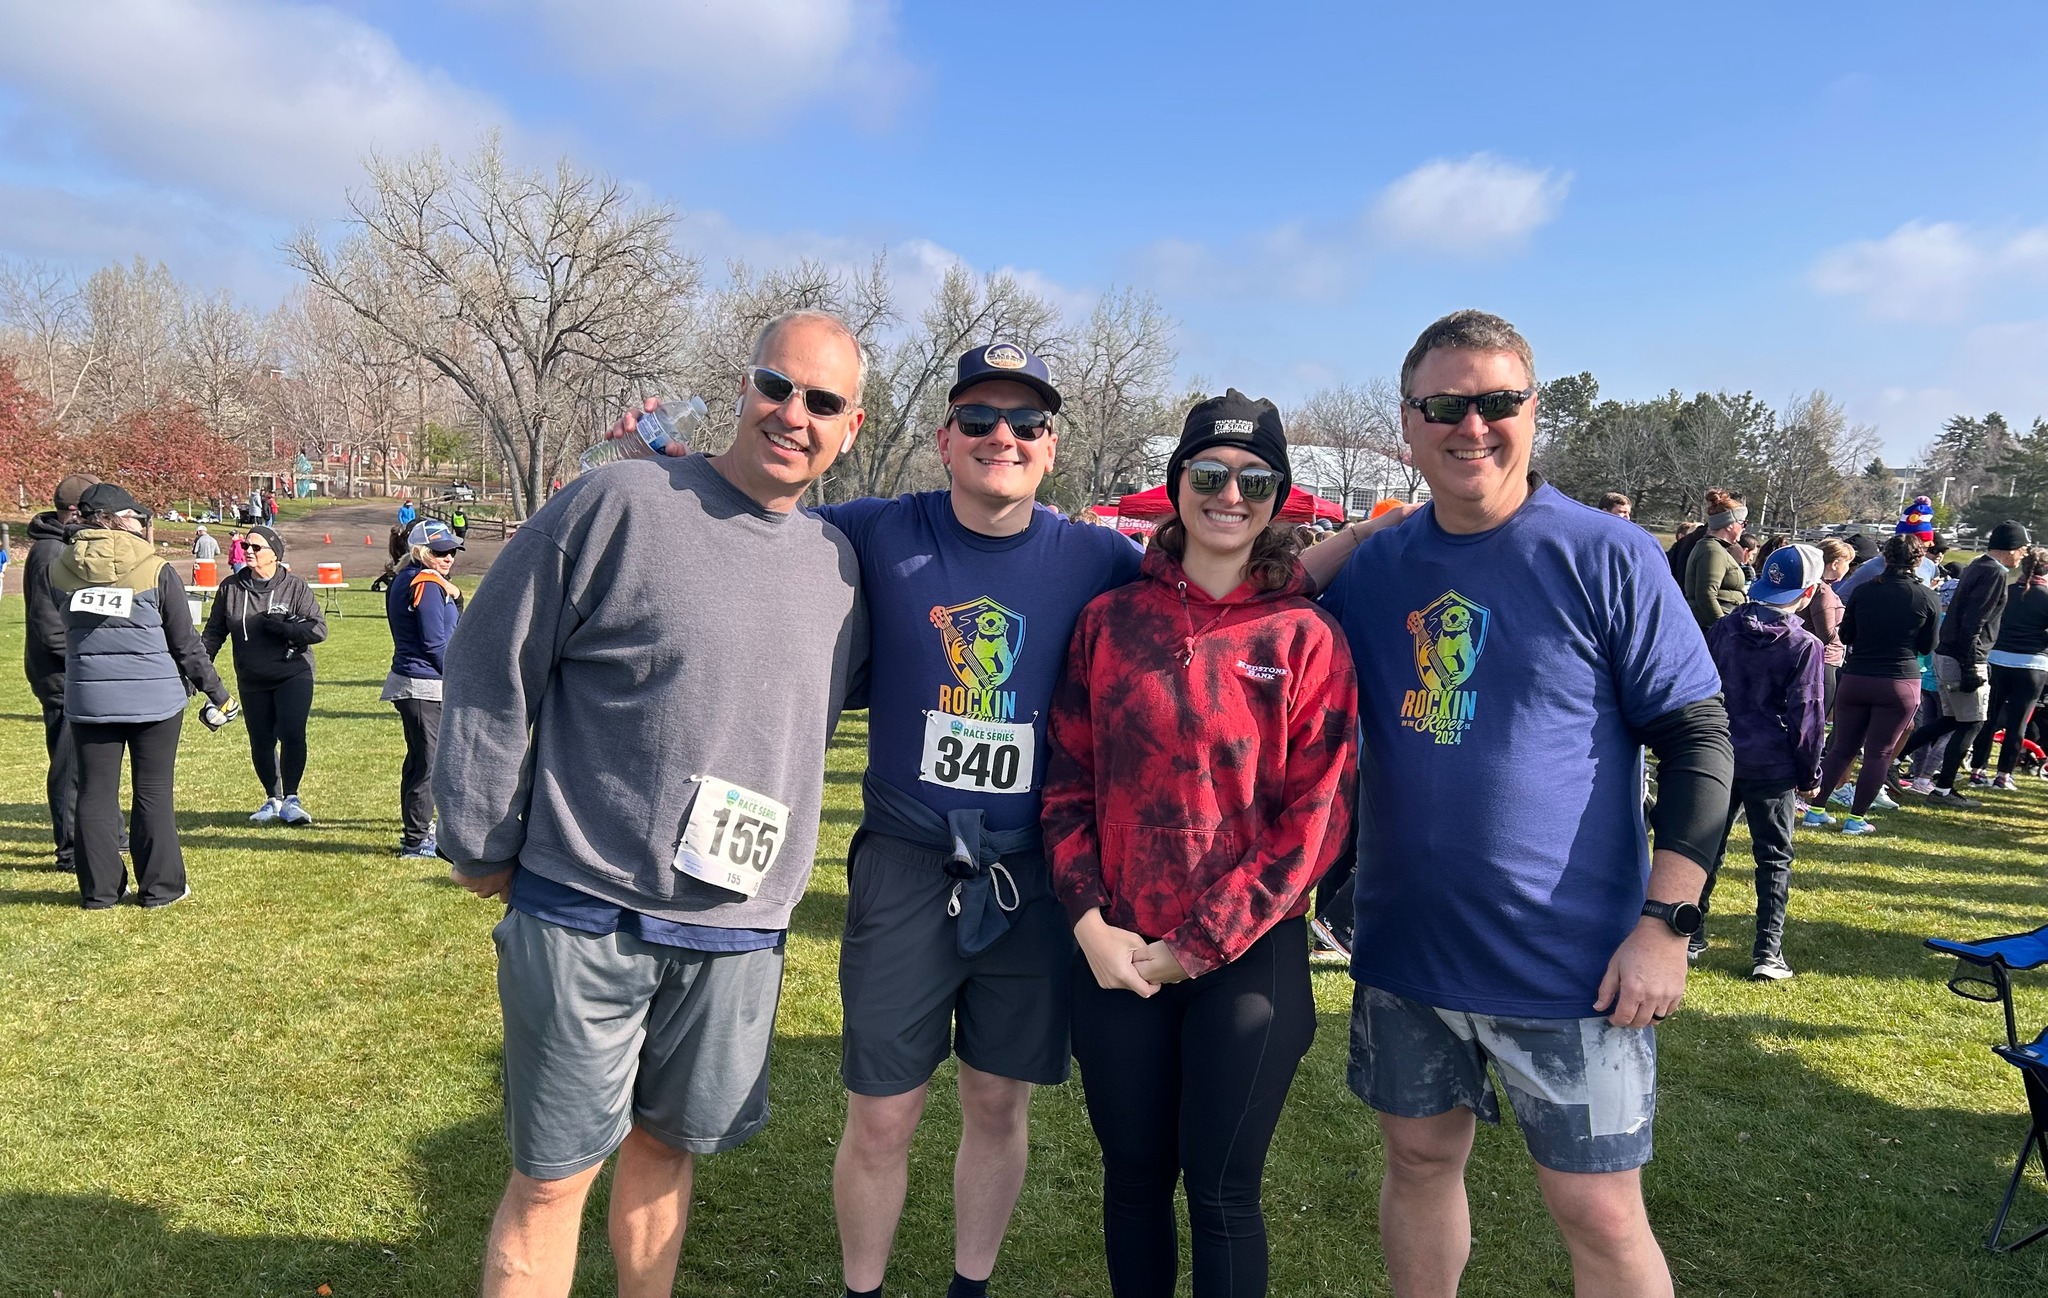 Our team members participated in the Rockin' on the River 5K in Littleton last weekend! Josh, Jason, Madison, and Kevin had a great time supporting the South Suburban's Community Recreation Scholarship Program. We look forward to participating in more activities this summer!